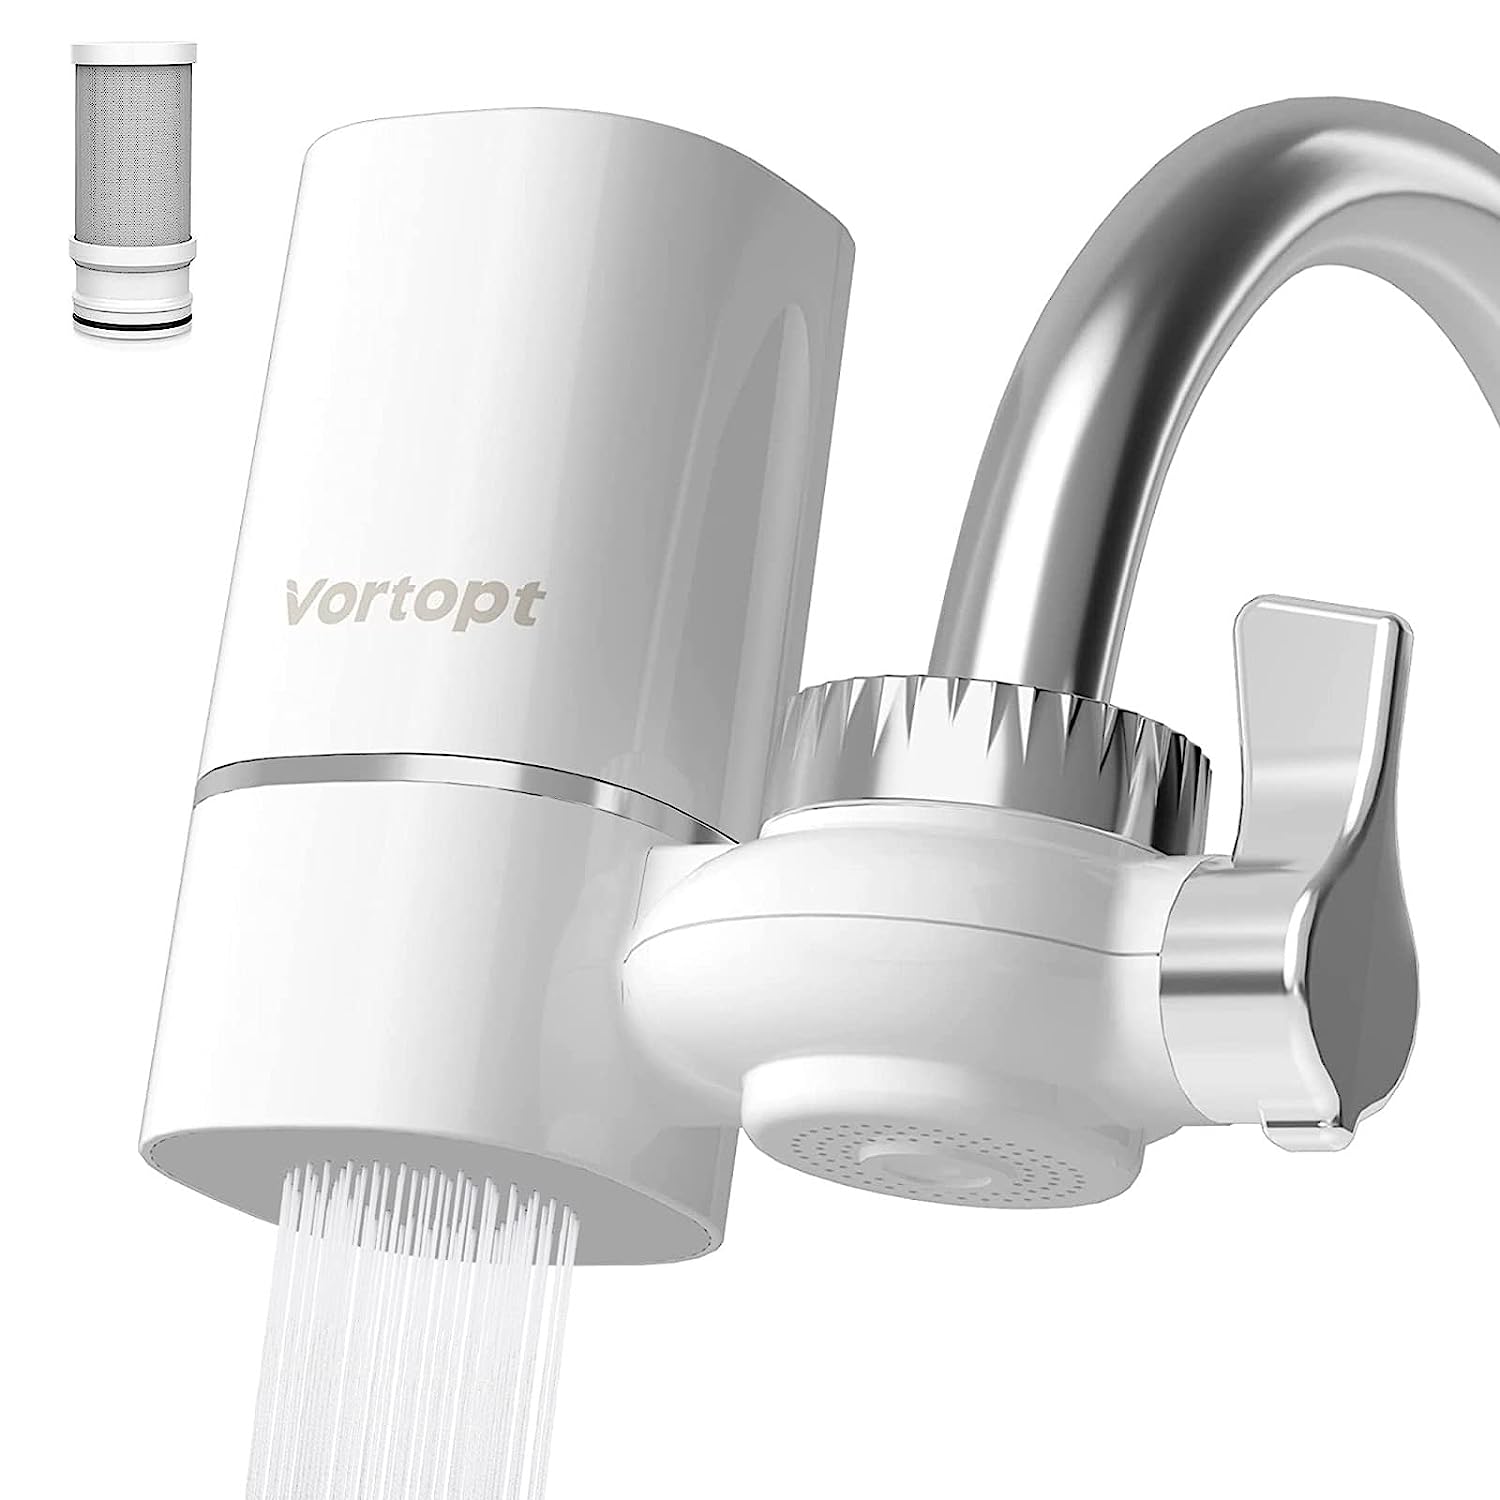 TAPP Water EcoPro Compact Tap Water Filter for Sink - Tap Mounted